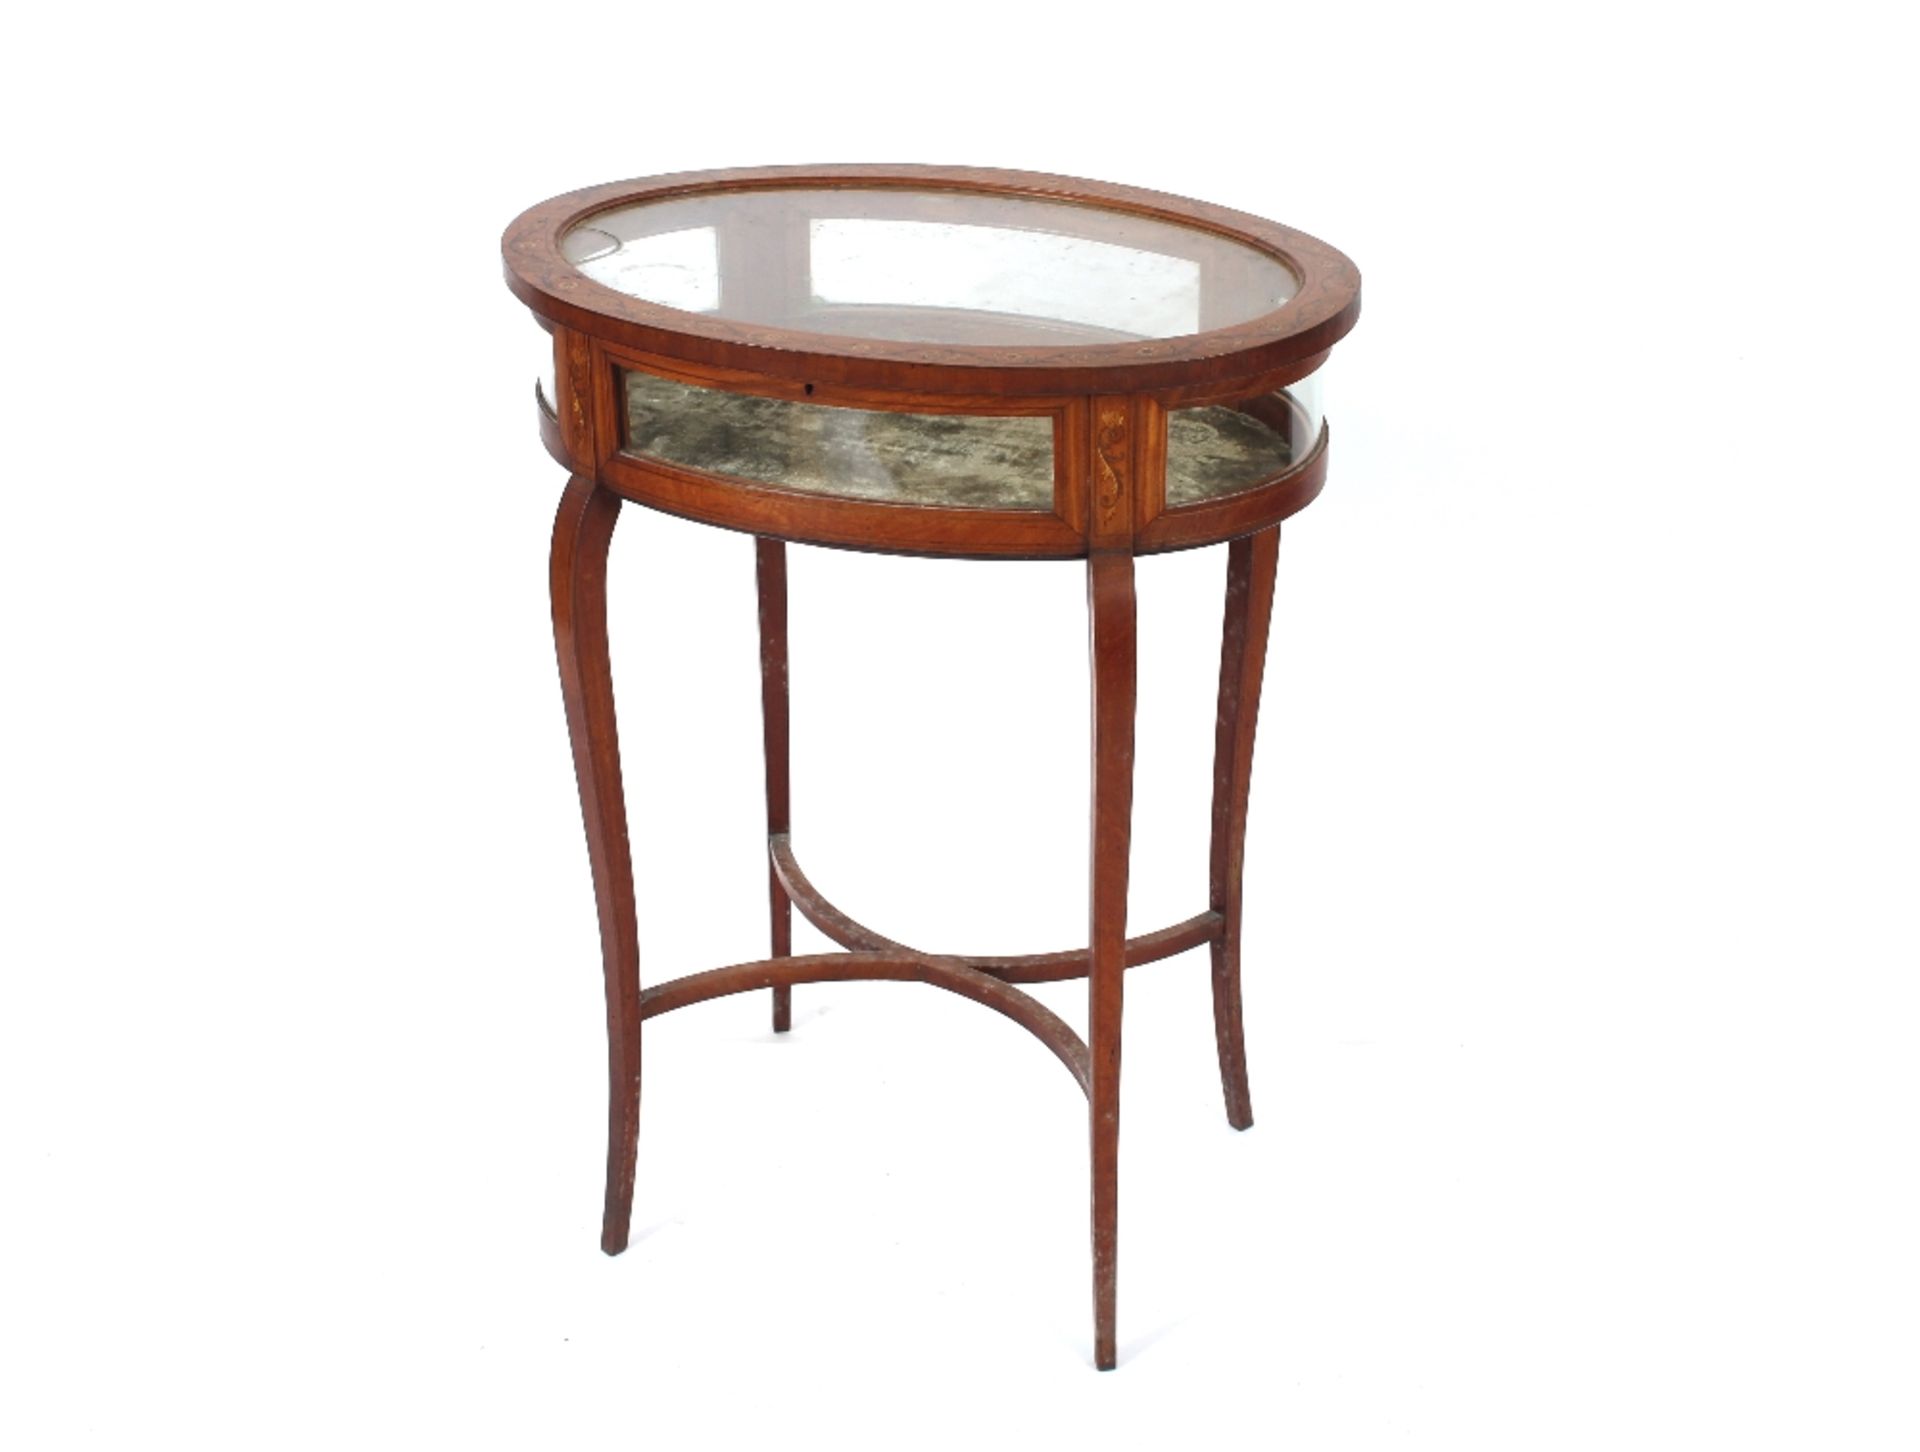 An Edwardian painted satinwood oval curio cabinet raised on bowed supports united by an under